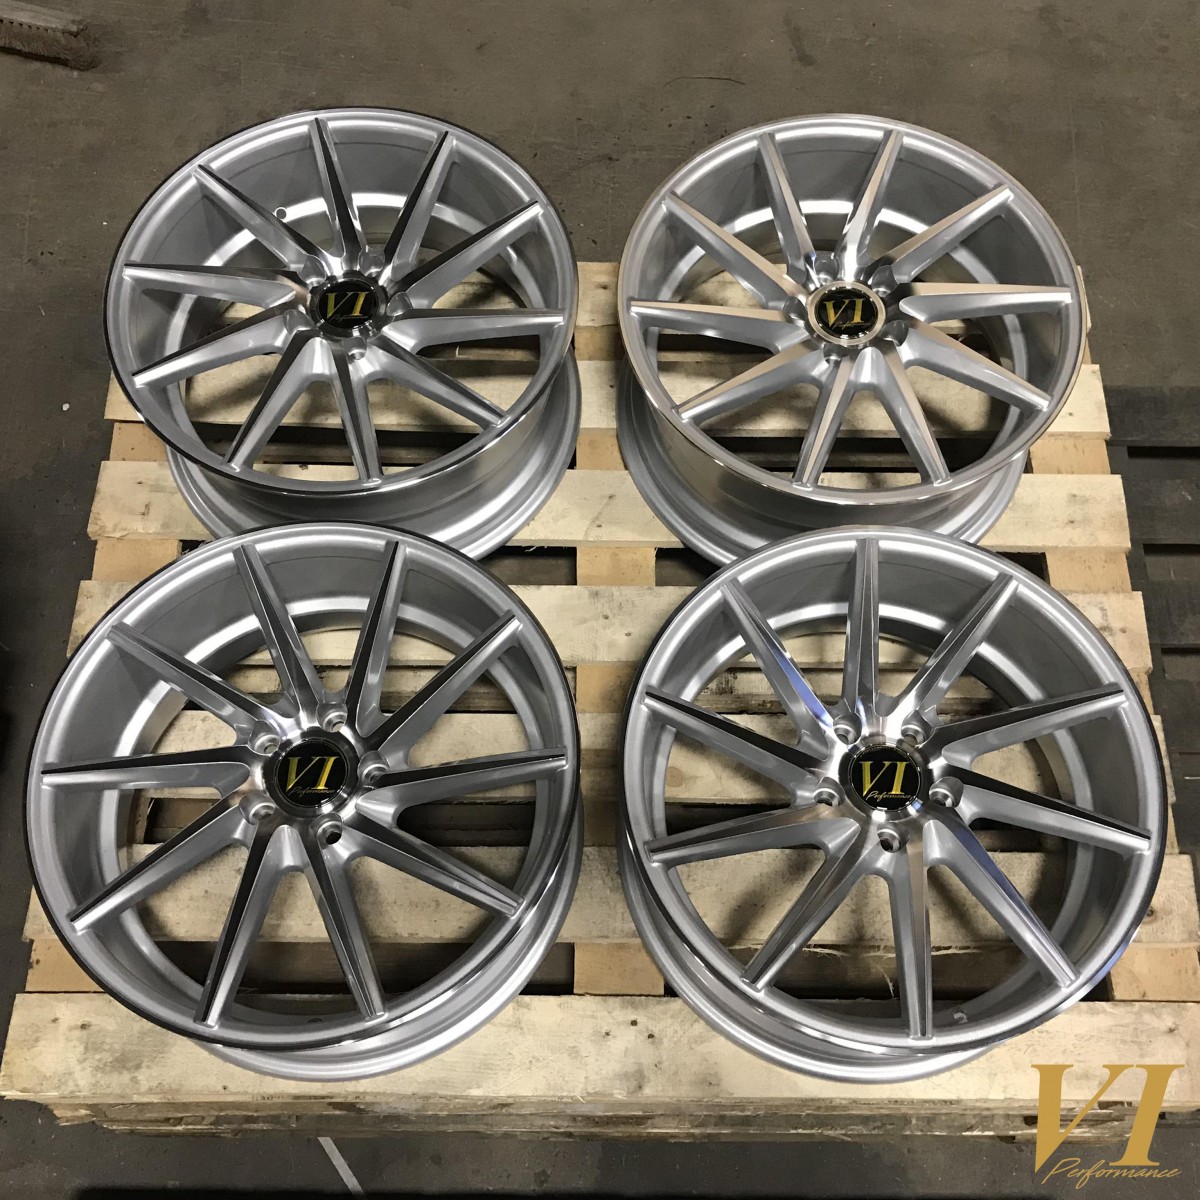 6Performance ESH Silver with Polished Face 18x8.0 5x112 ET45 - Set of 4 